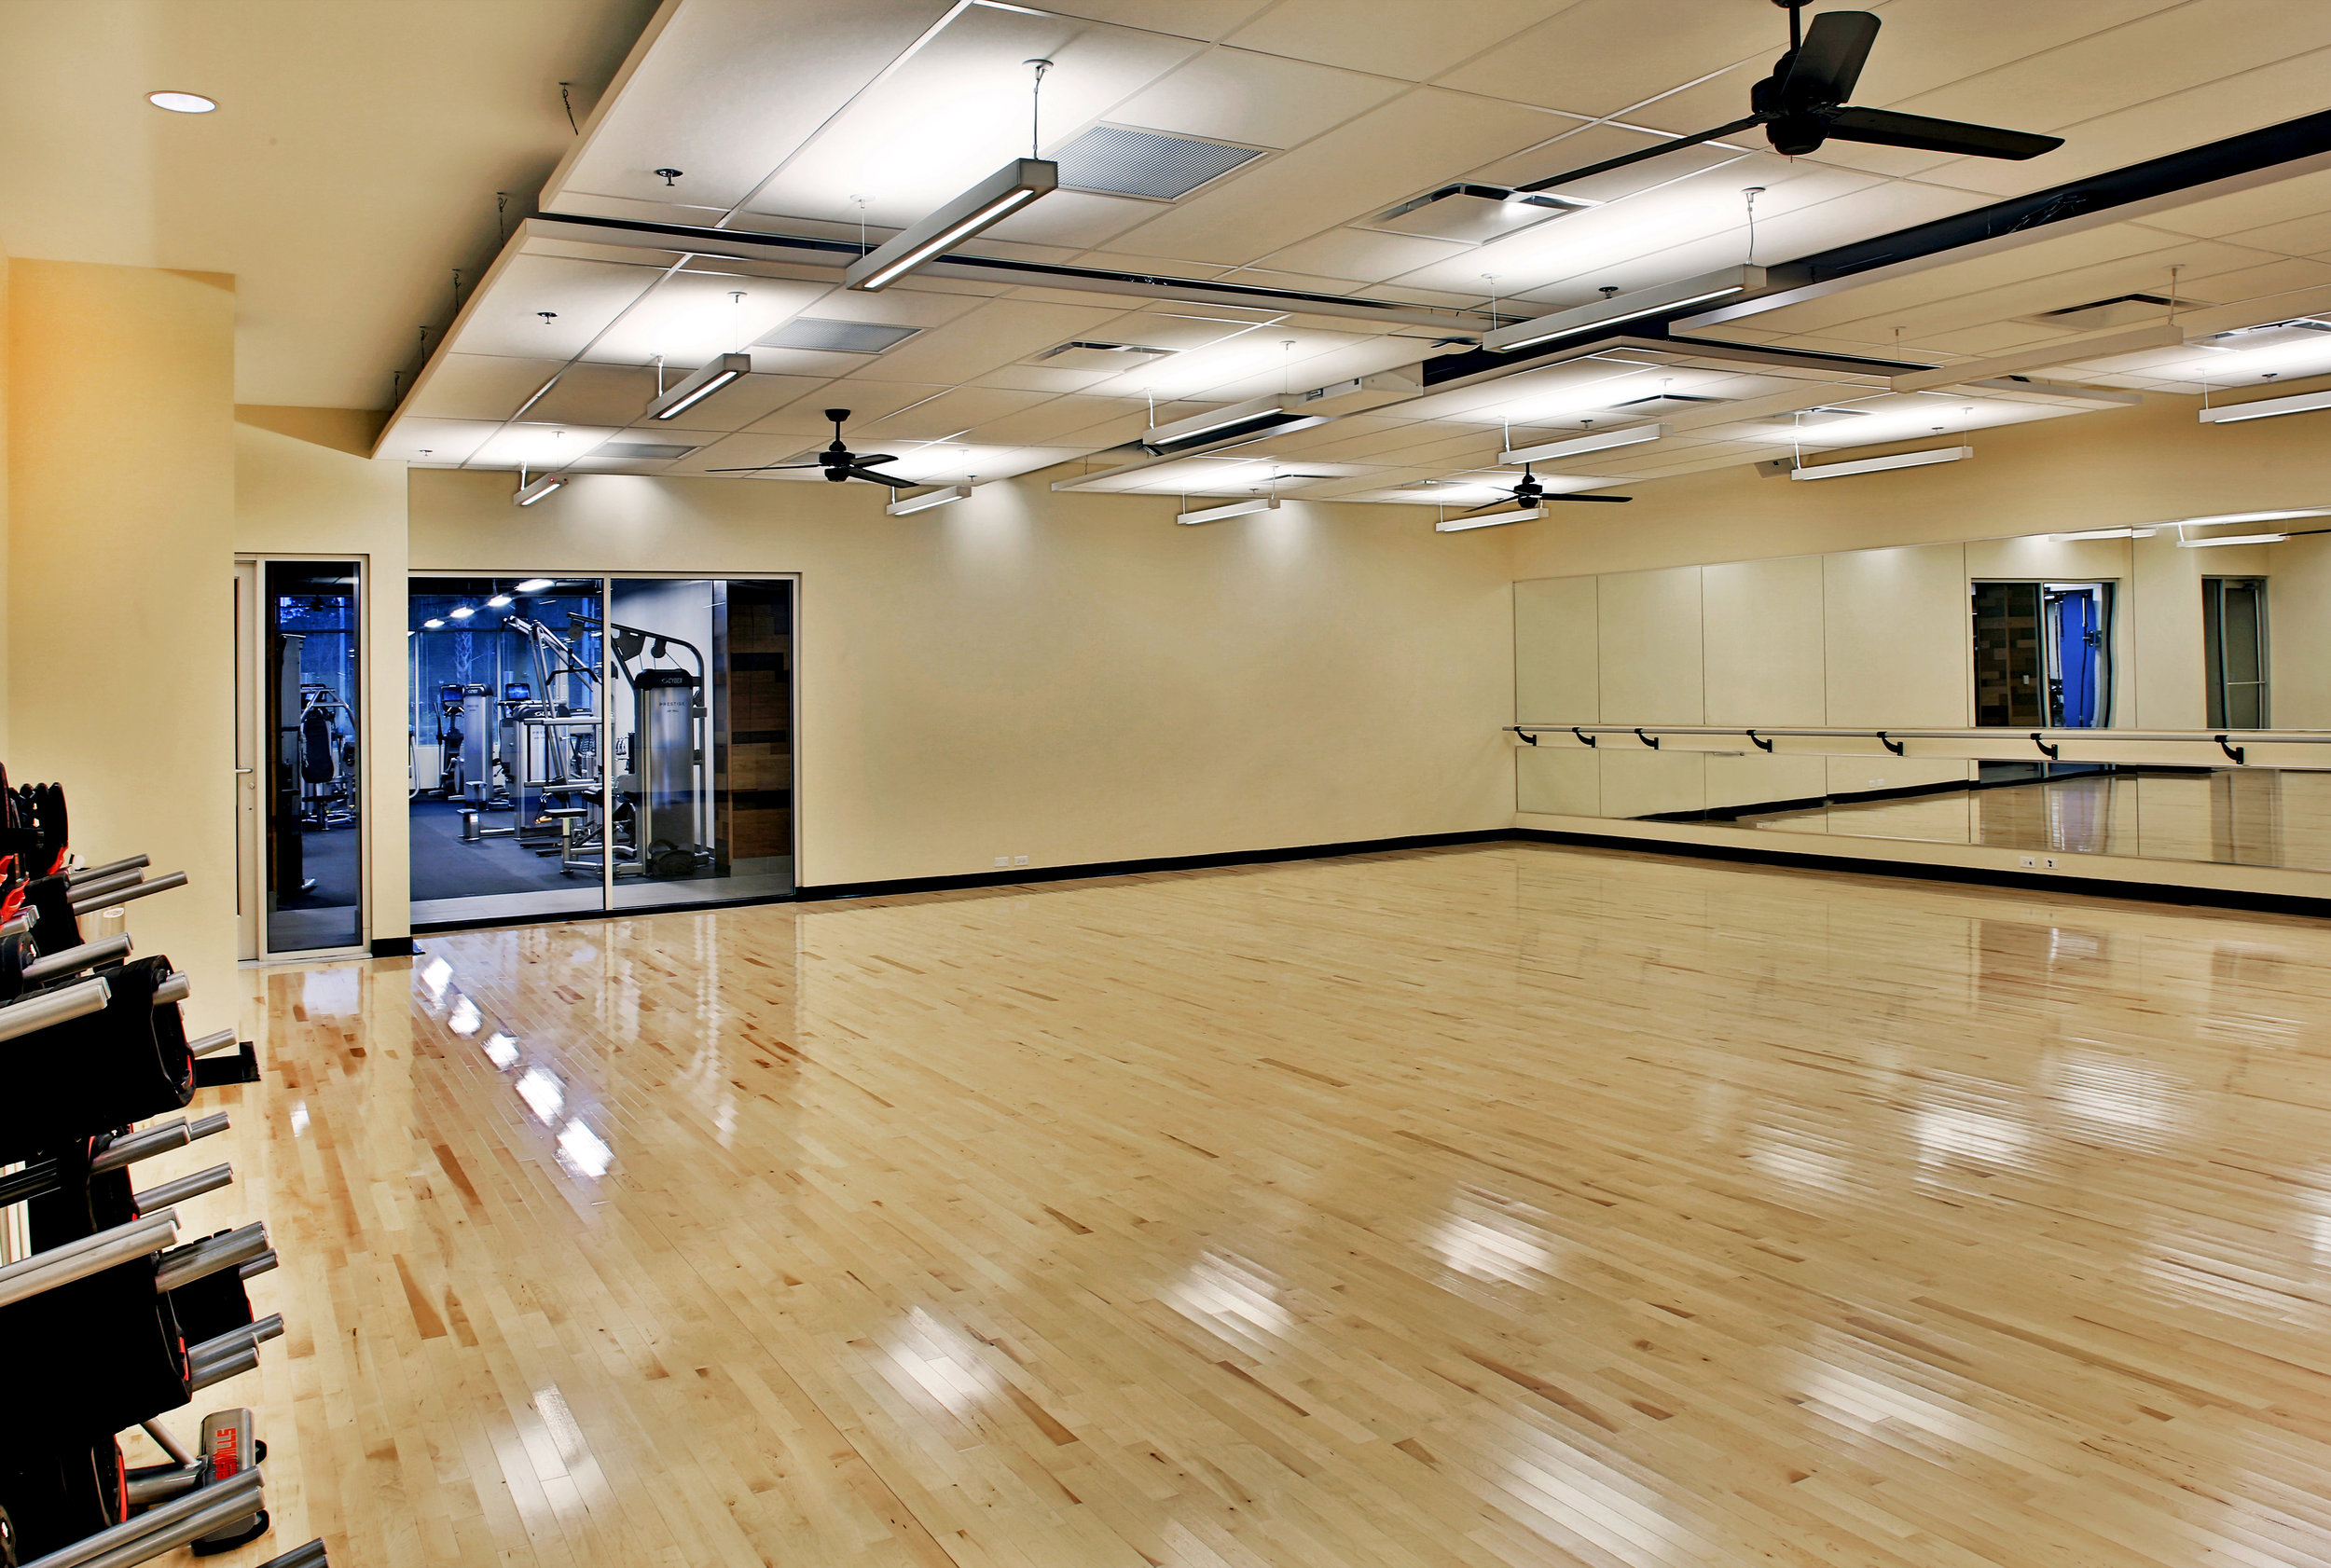 Baptist North YMCA Group Exercise Room.jpg